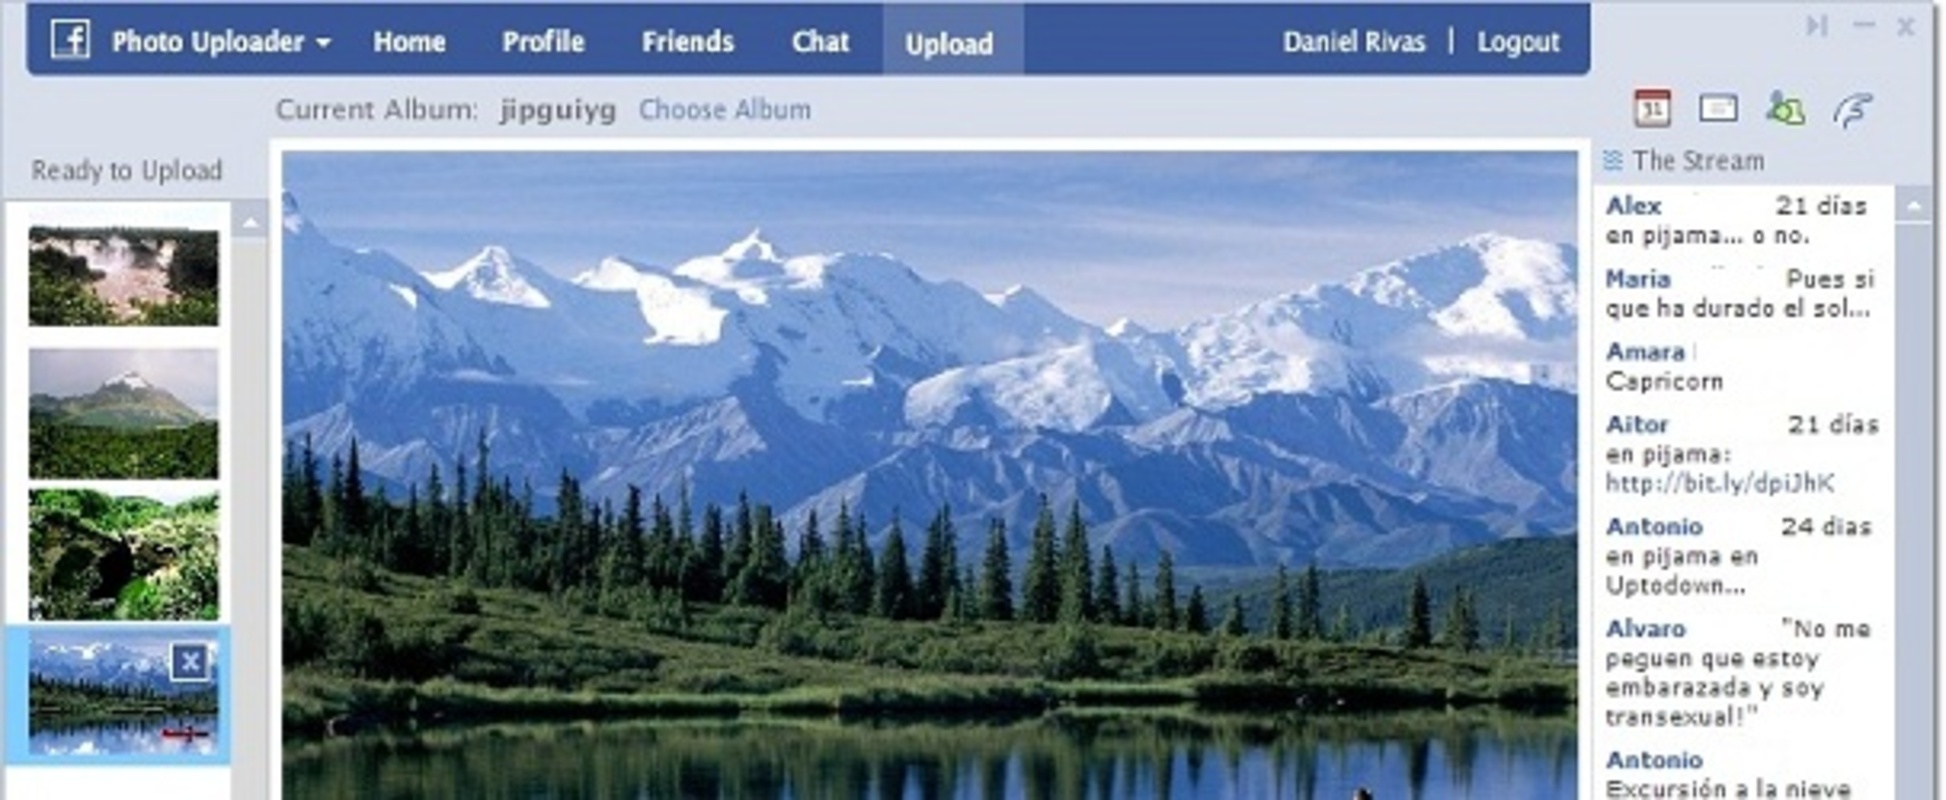 Photo Uploader for Facebook 1.5 feature